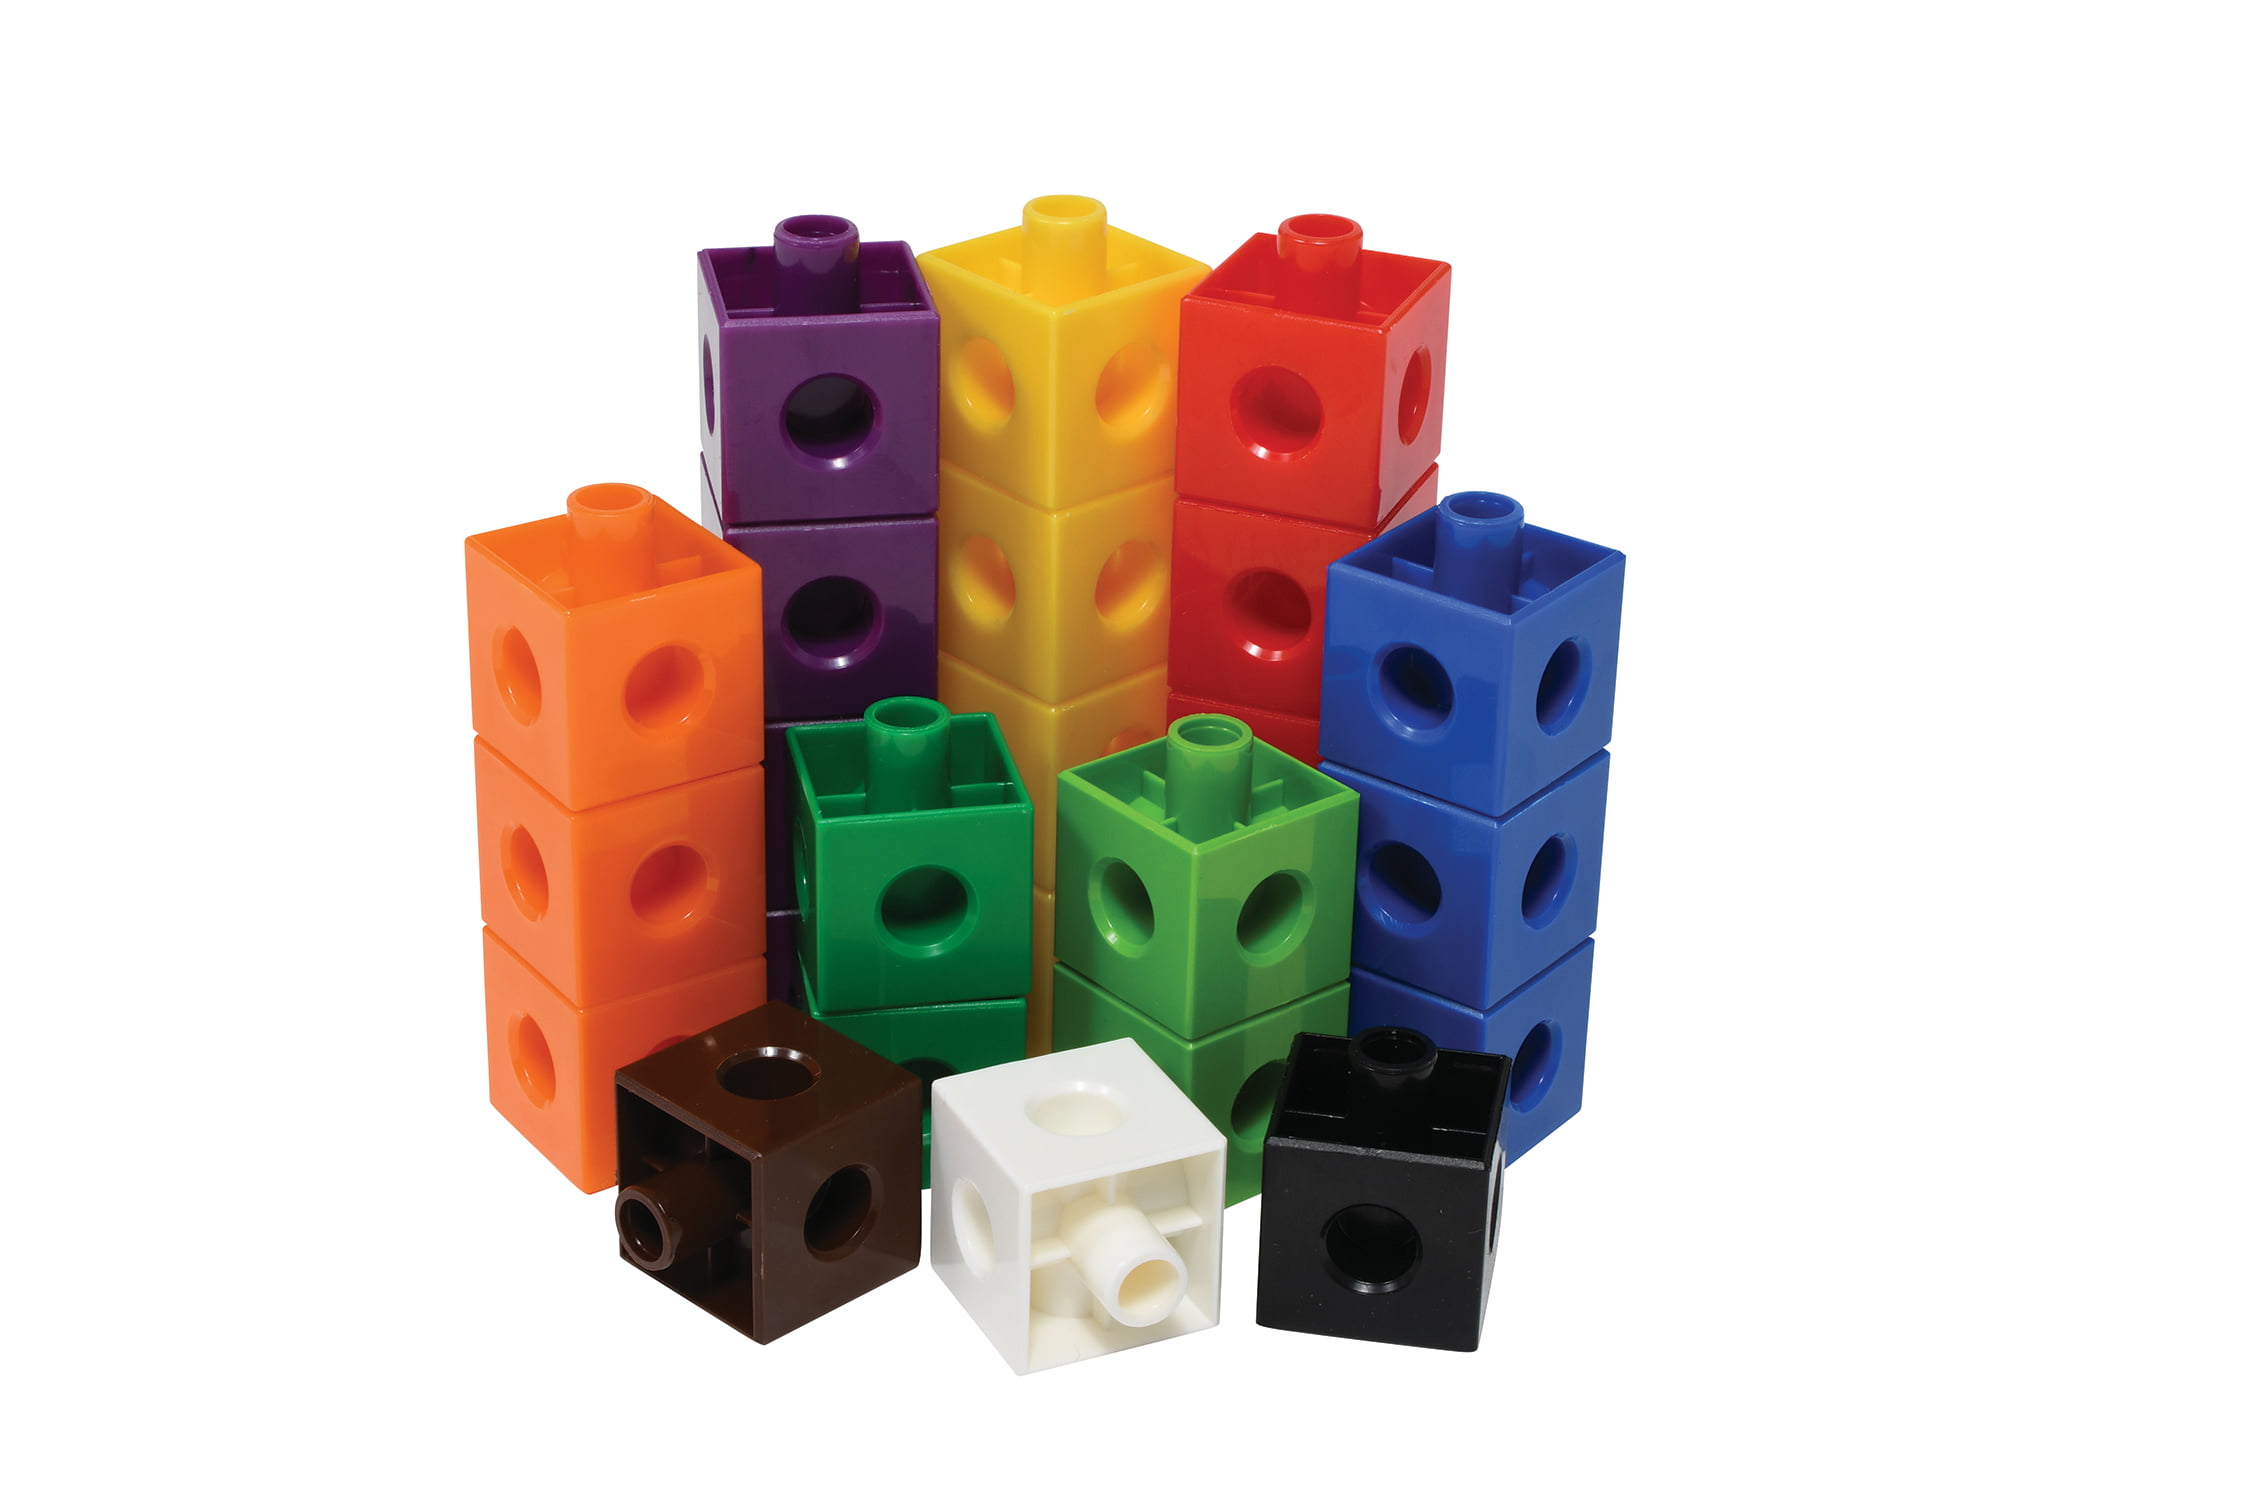 Set ... edxeducation-12010 Linking Cubes in Home Learning Toy for Early Math 